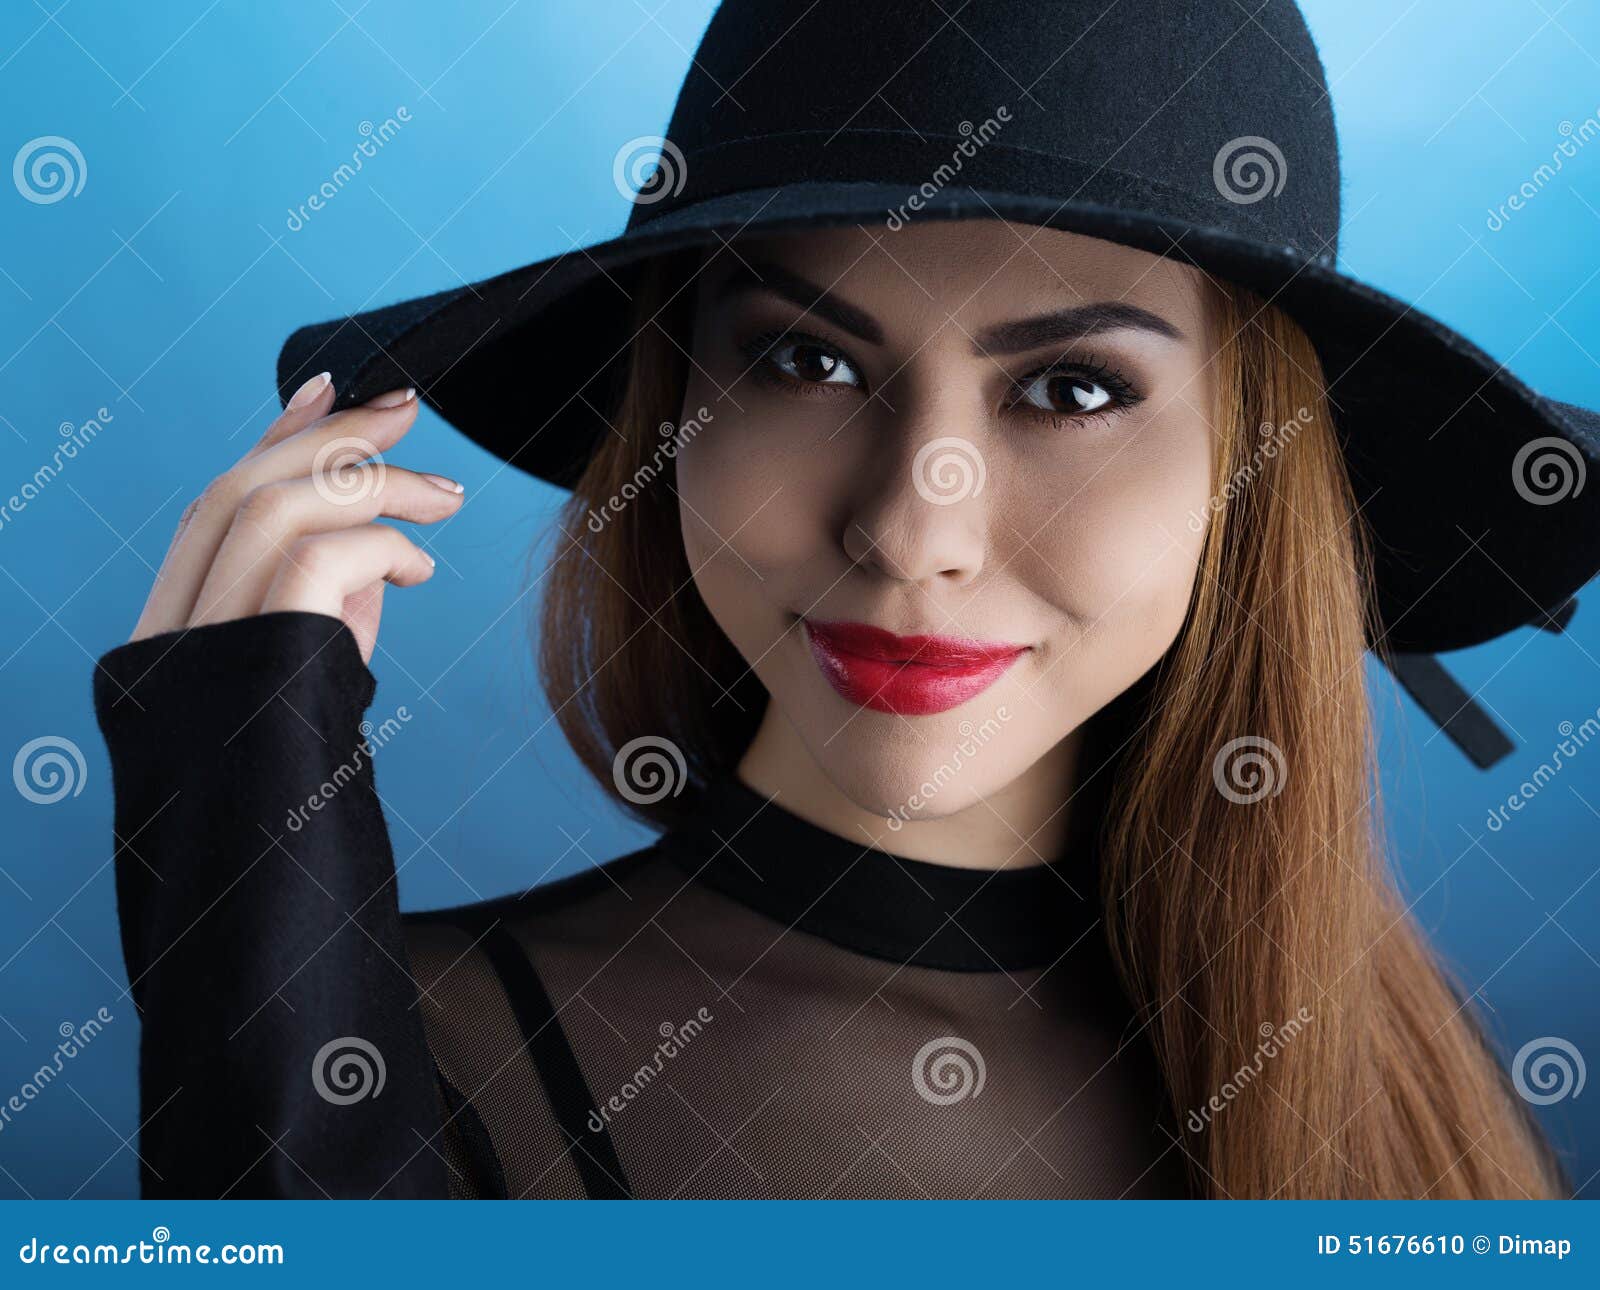 Girl in hat stock photo. Image of beauty, happy, person - 51676610